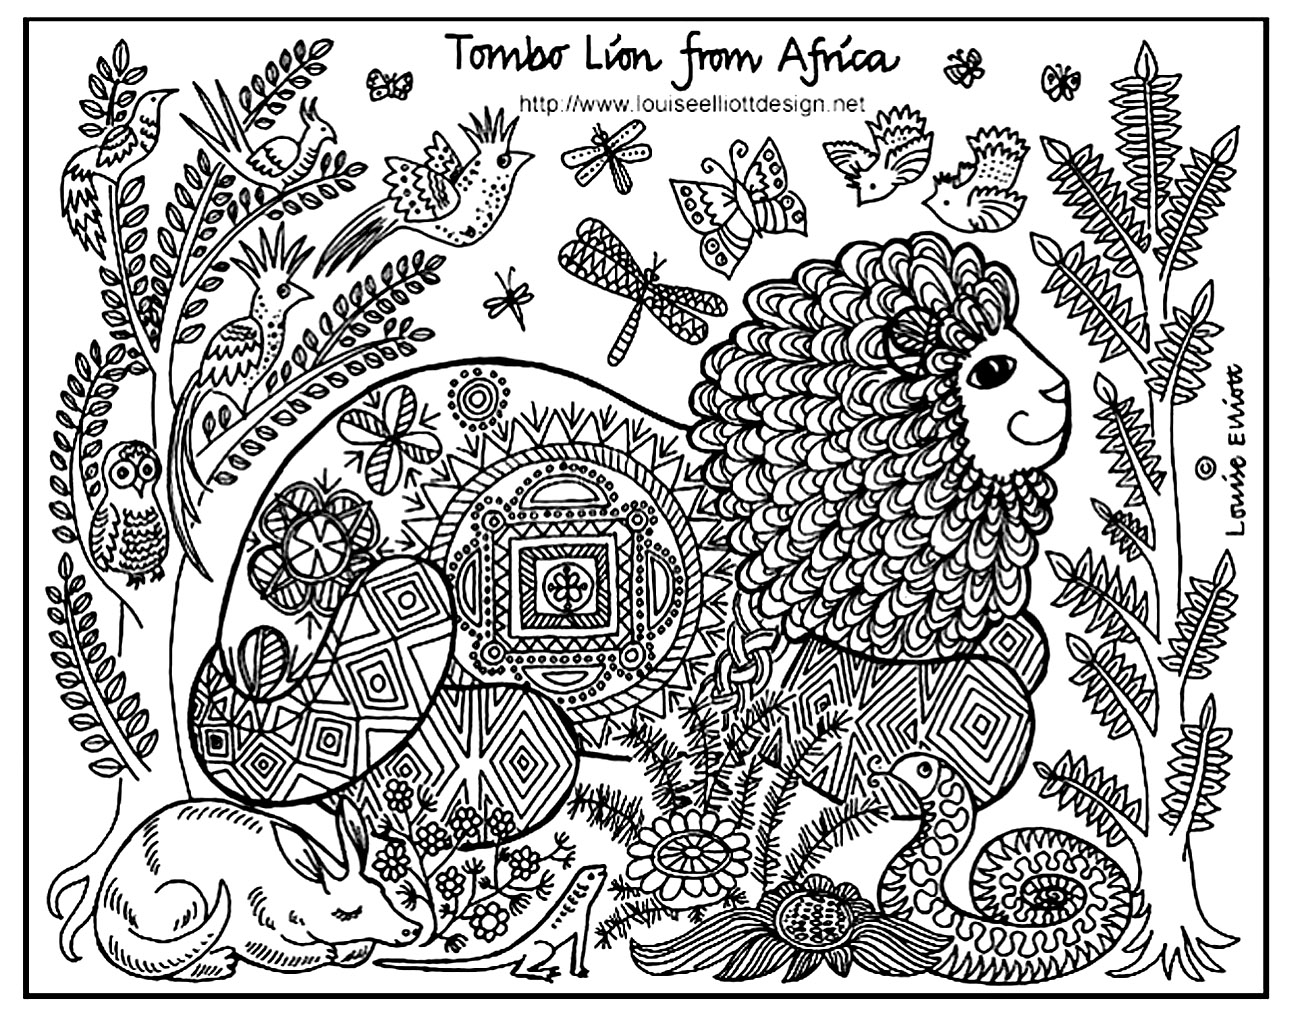 Drawing 'Tombo Lion of Africa' (source : Louise Elliot)